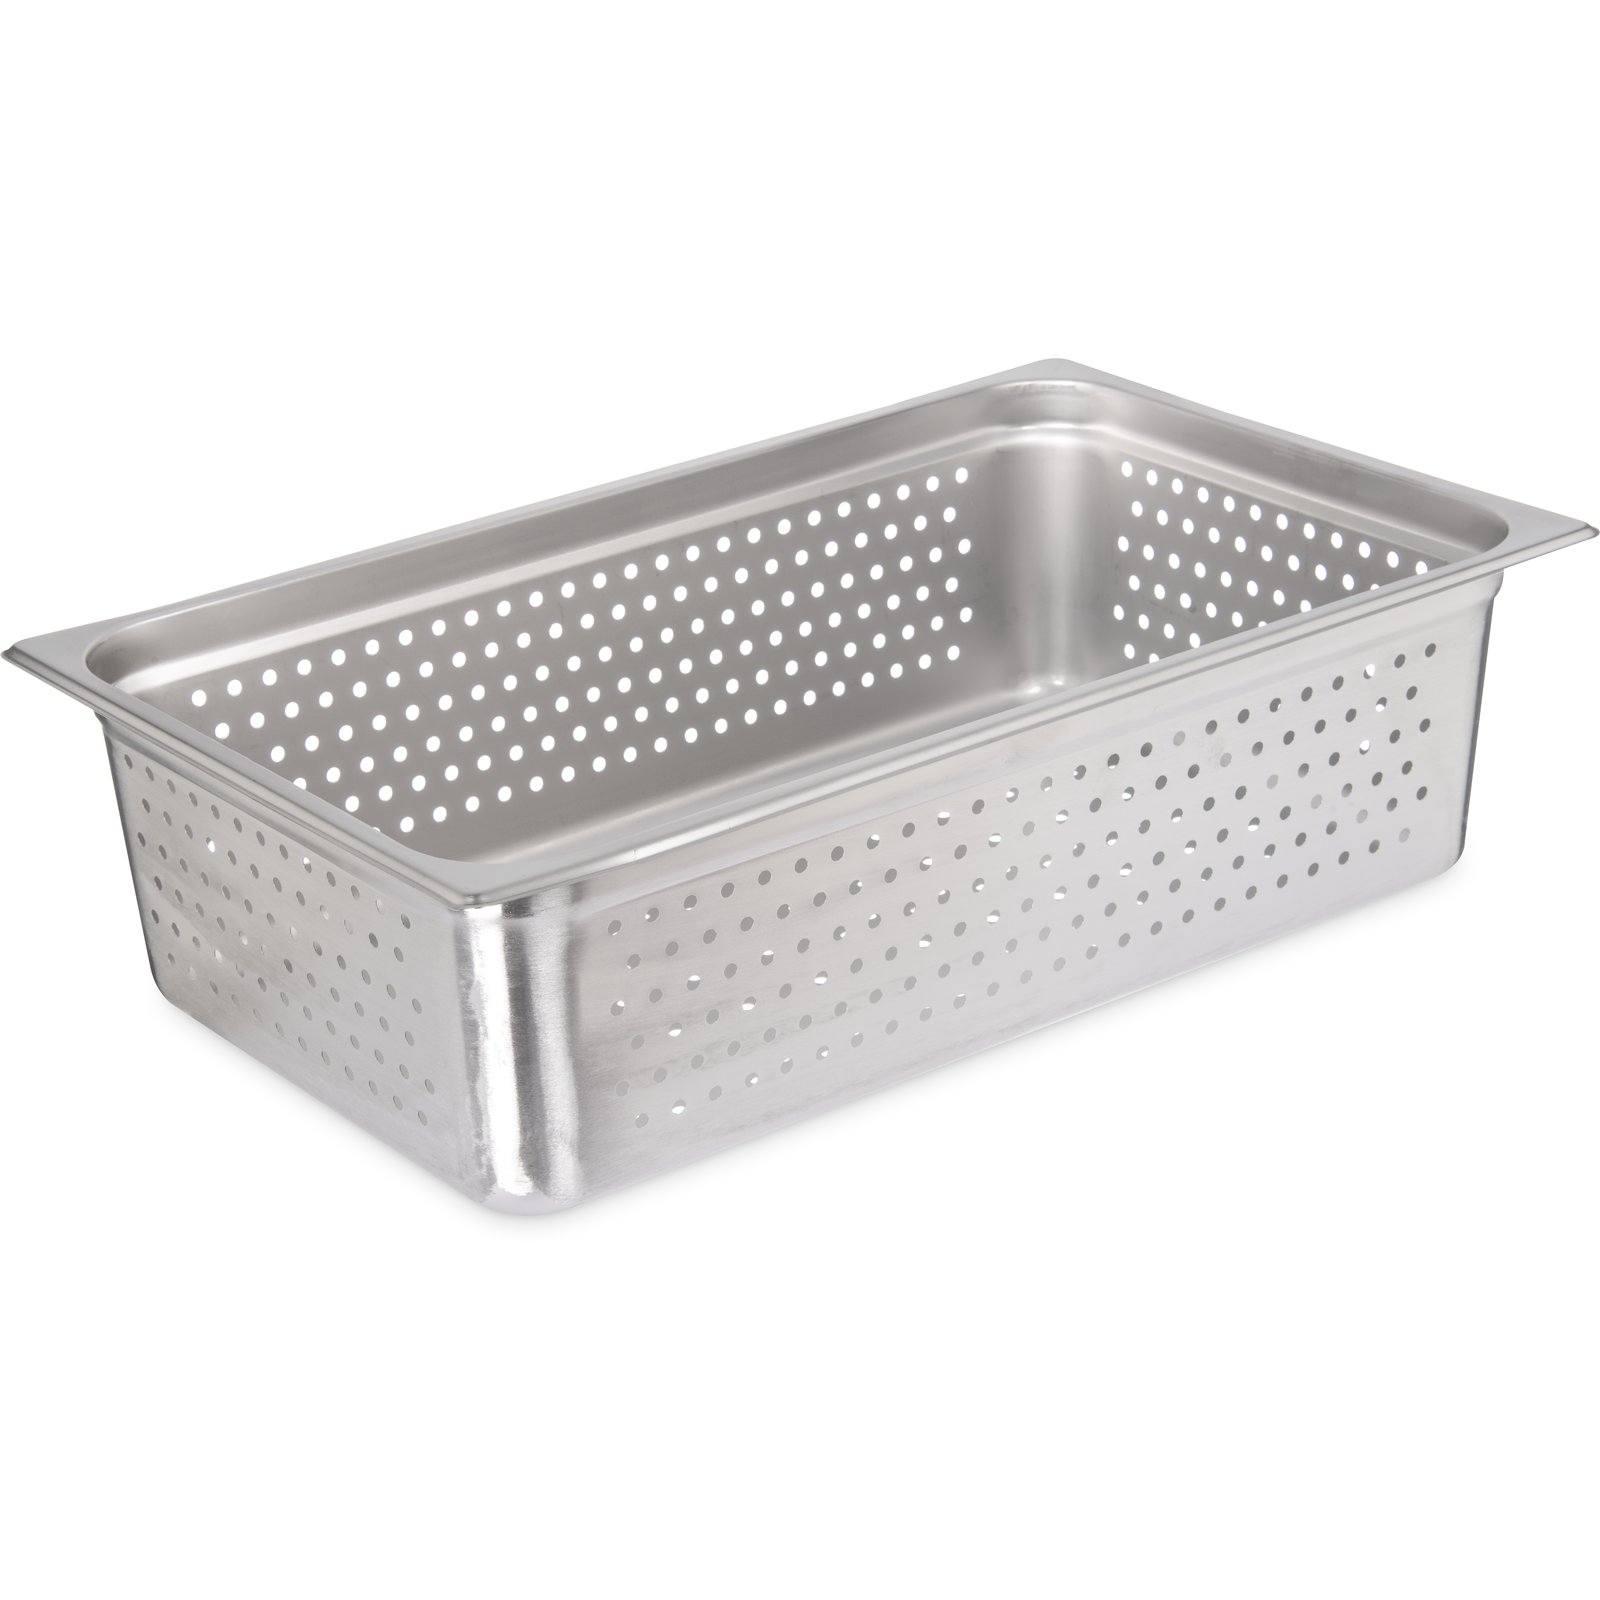 6 Packs Perforated Gastronorm Gastro Pans 1/1 100mm Deep Steam Oven Trays Hotel